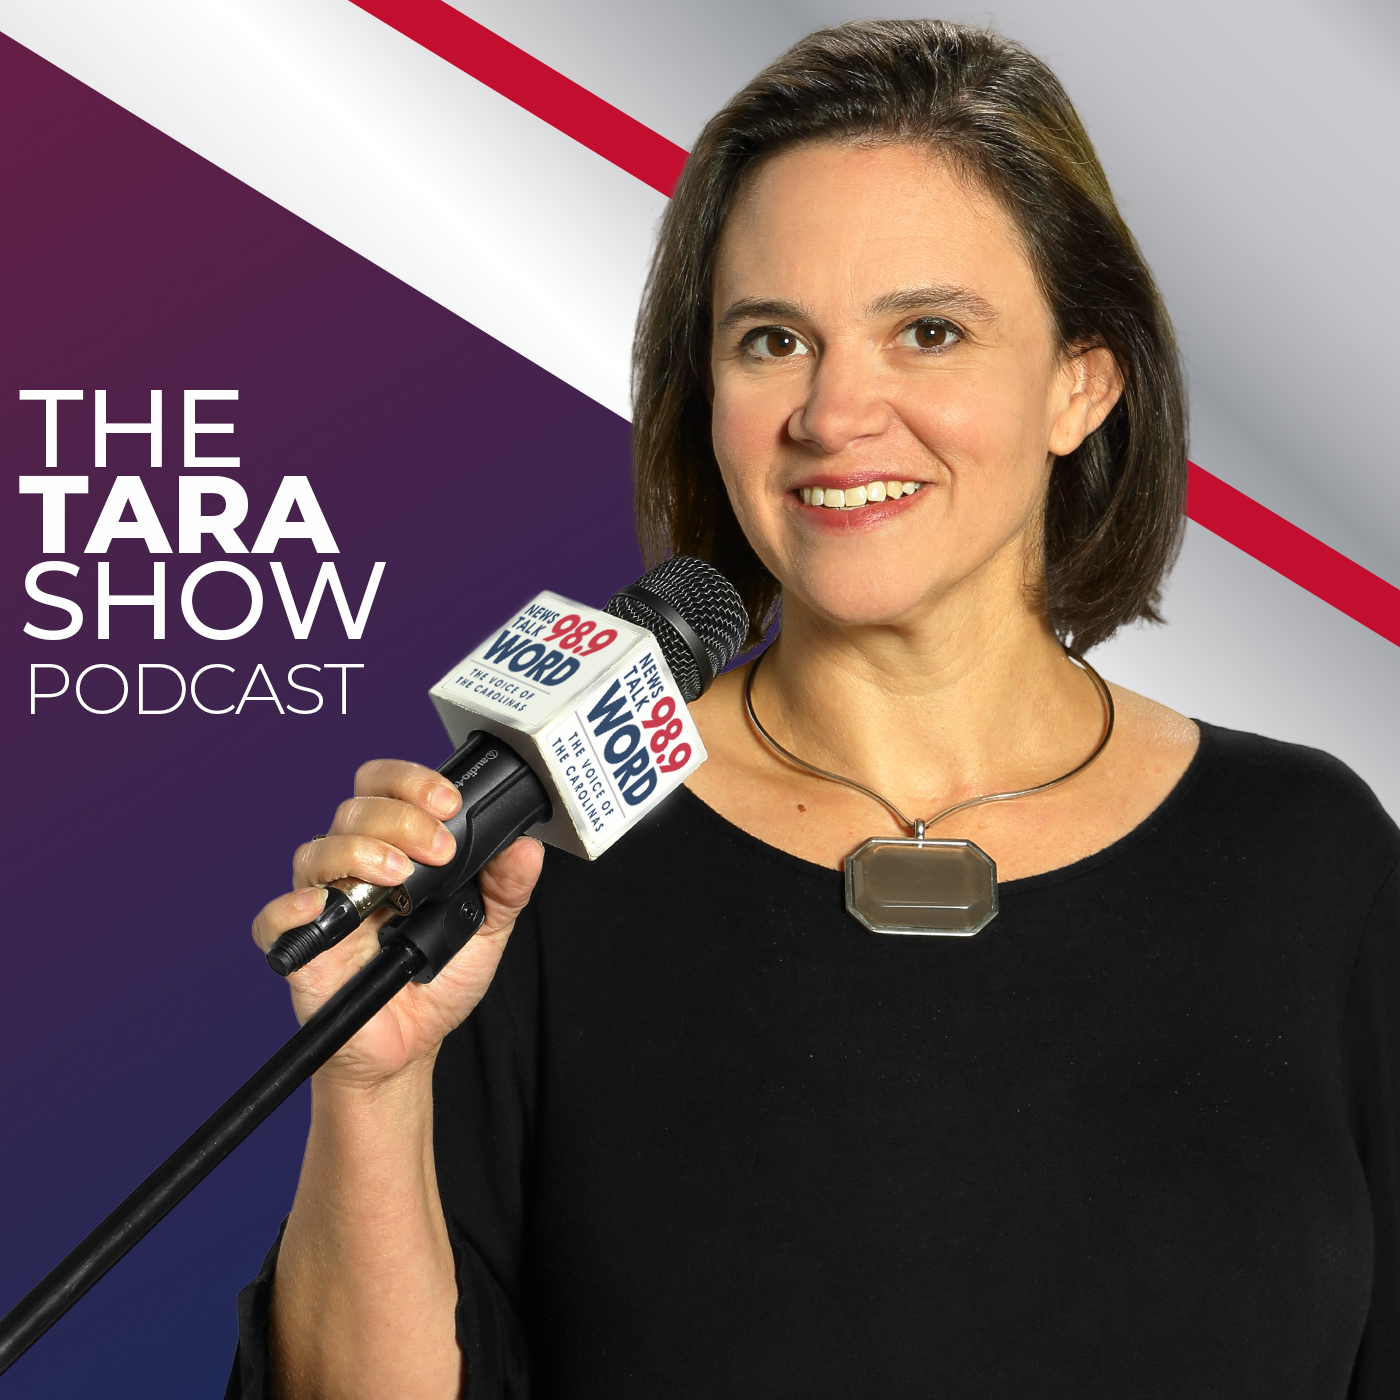 Hour 3: The Tara Show - “Interview with Special Guest Rep. Benton Blount” “Obey the Mob” “Columbia College Dropped Charges” “Eliot vs Carper”